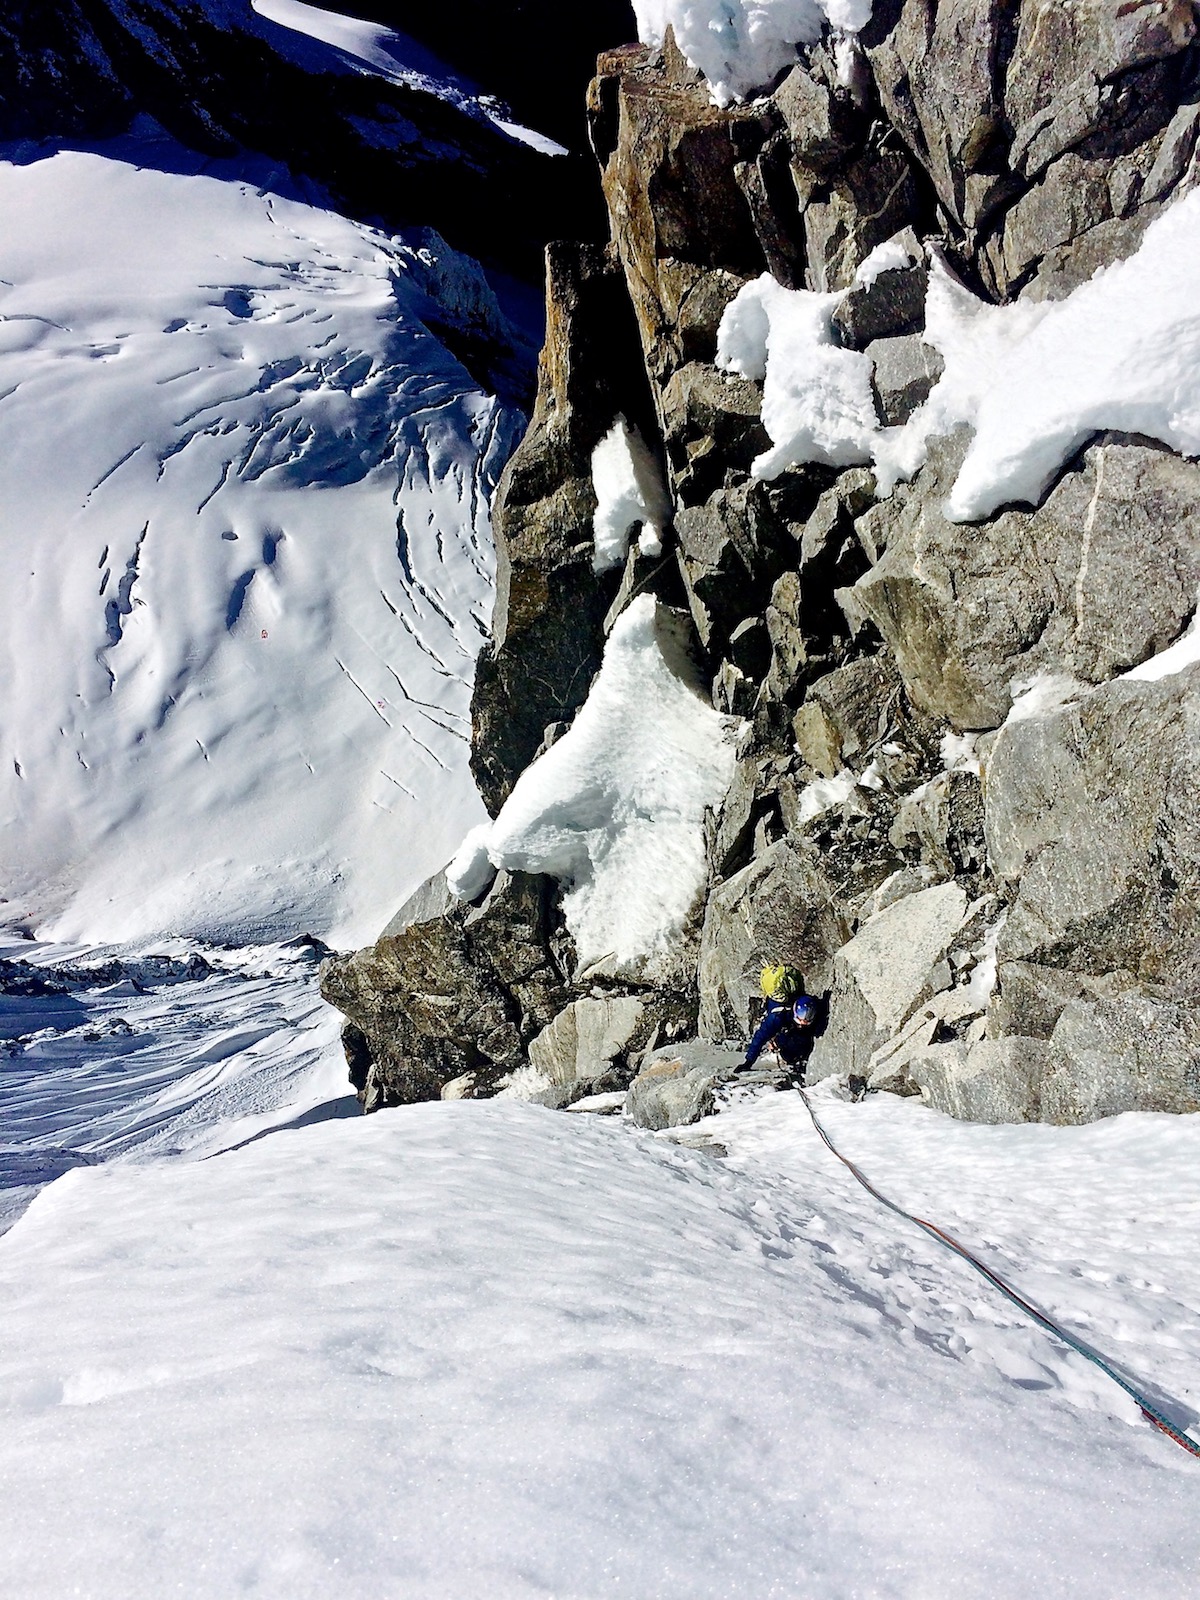 Mirhashemi follows one of the M5 pitches on the headwall of Chugimago's west face during the first ascent of Mixed Emotions (M6 AI5, 80 degrees, 900m). [Photo] Mark Pugliese